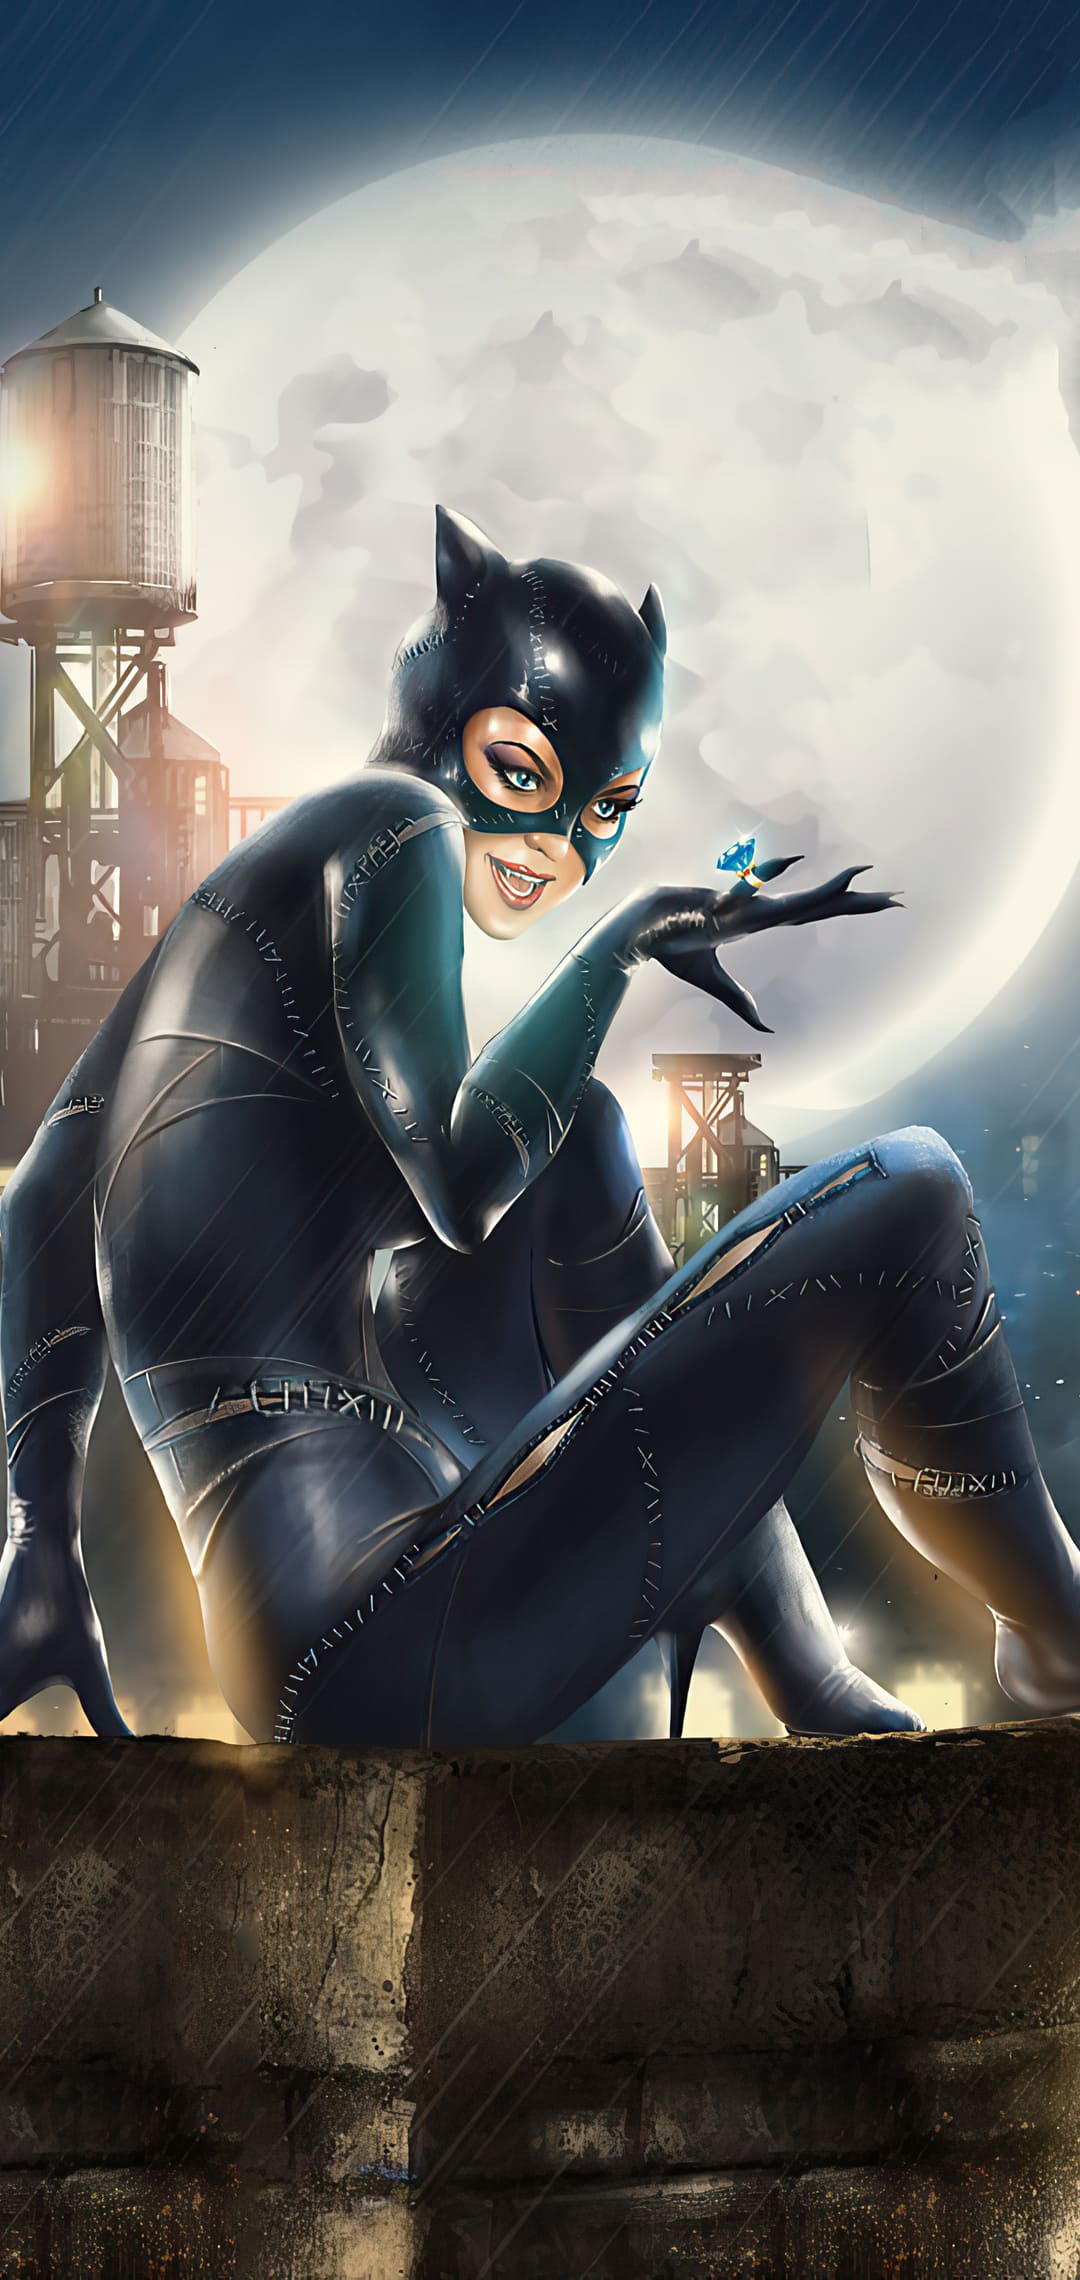 Catwoman iPhone Wallpaper Free Catwoman iPhone Background